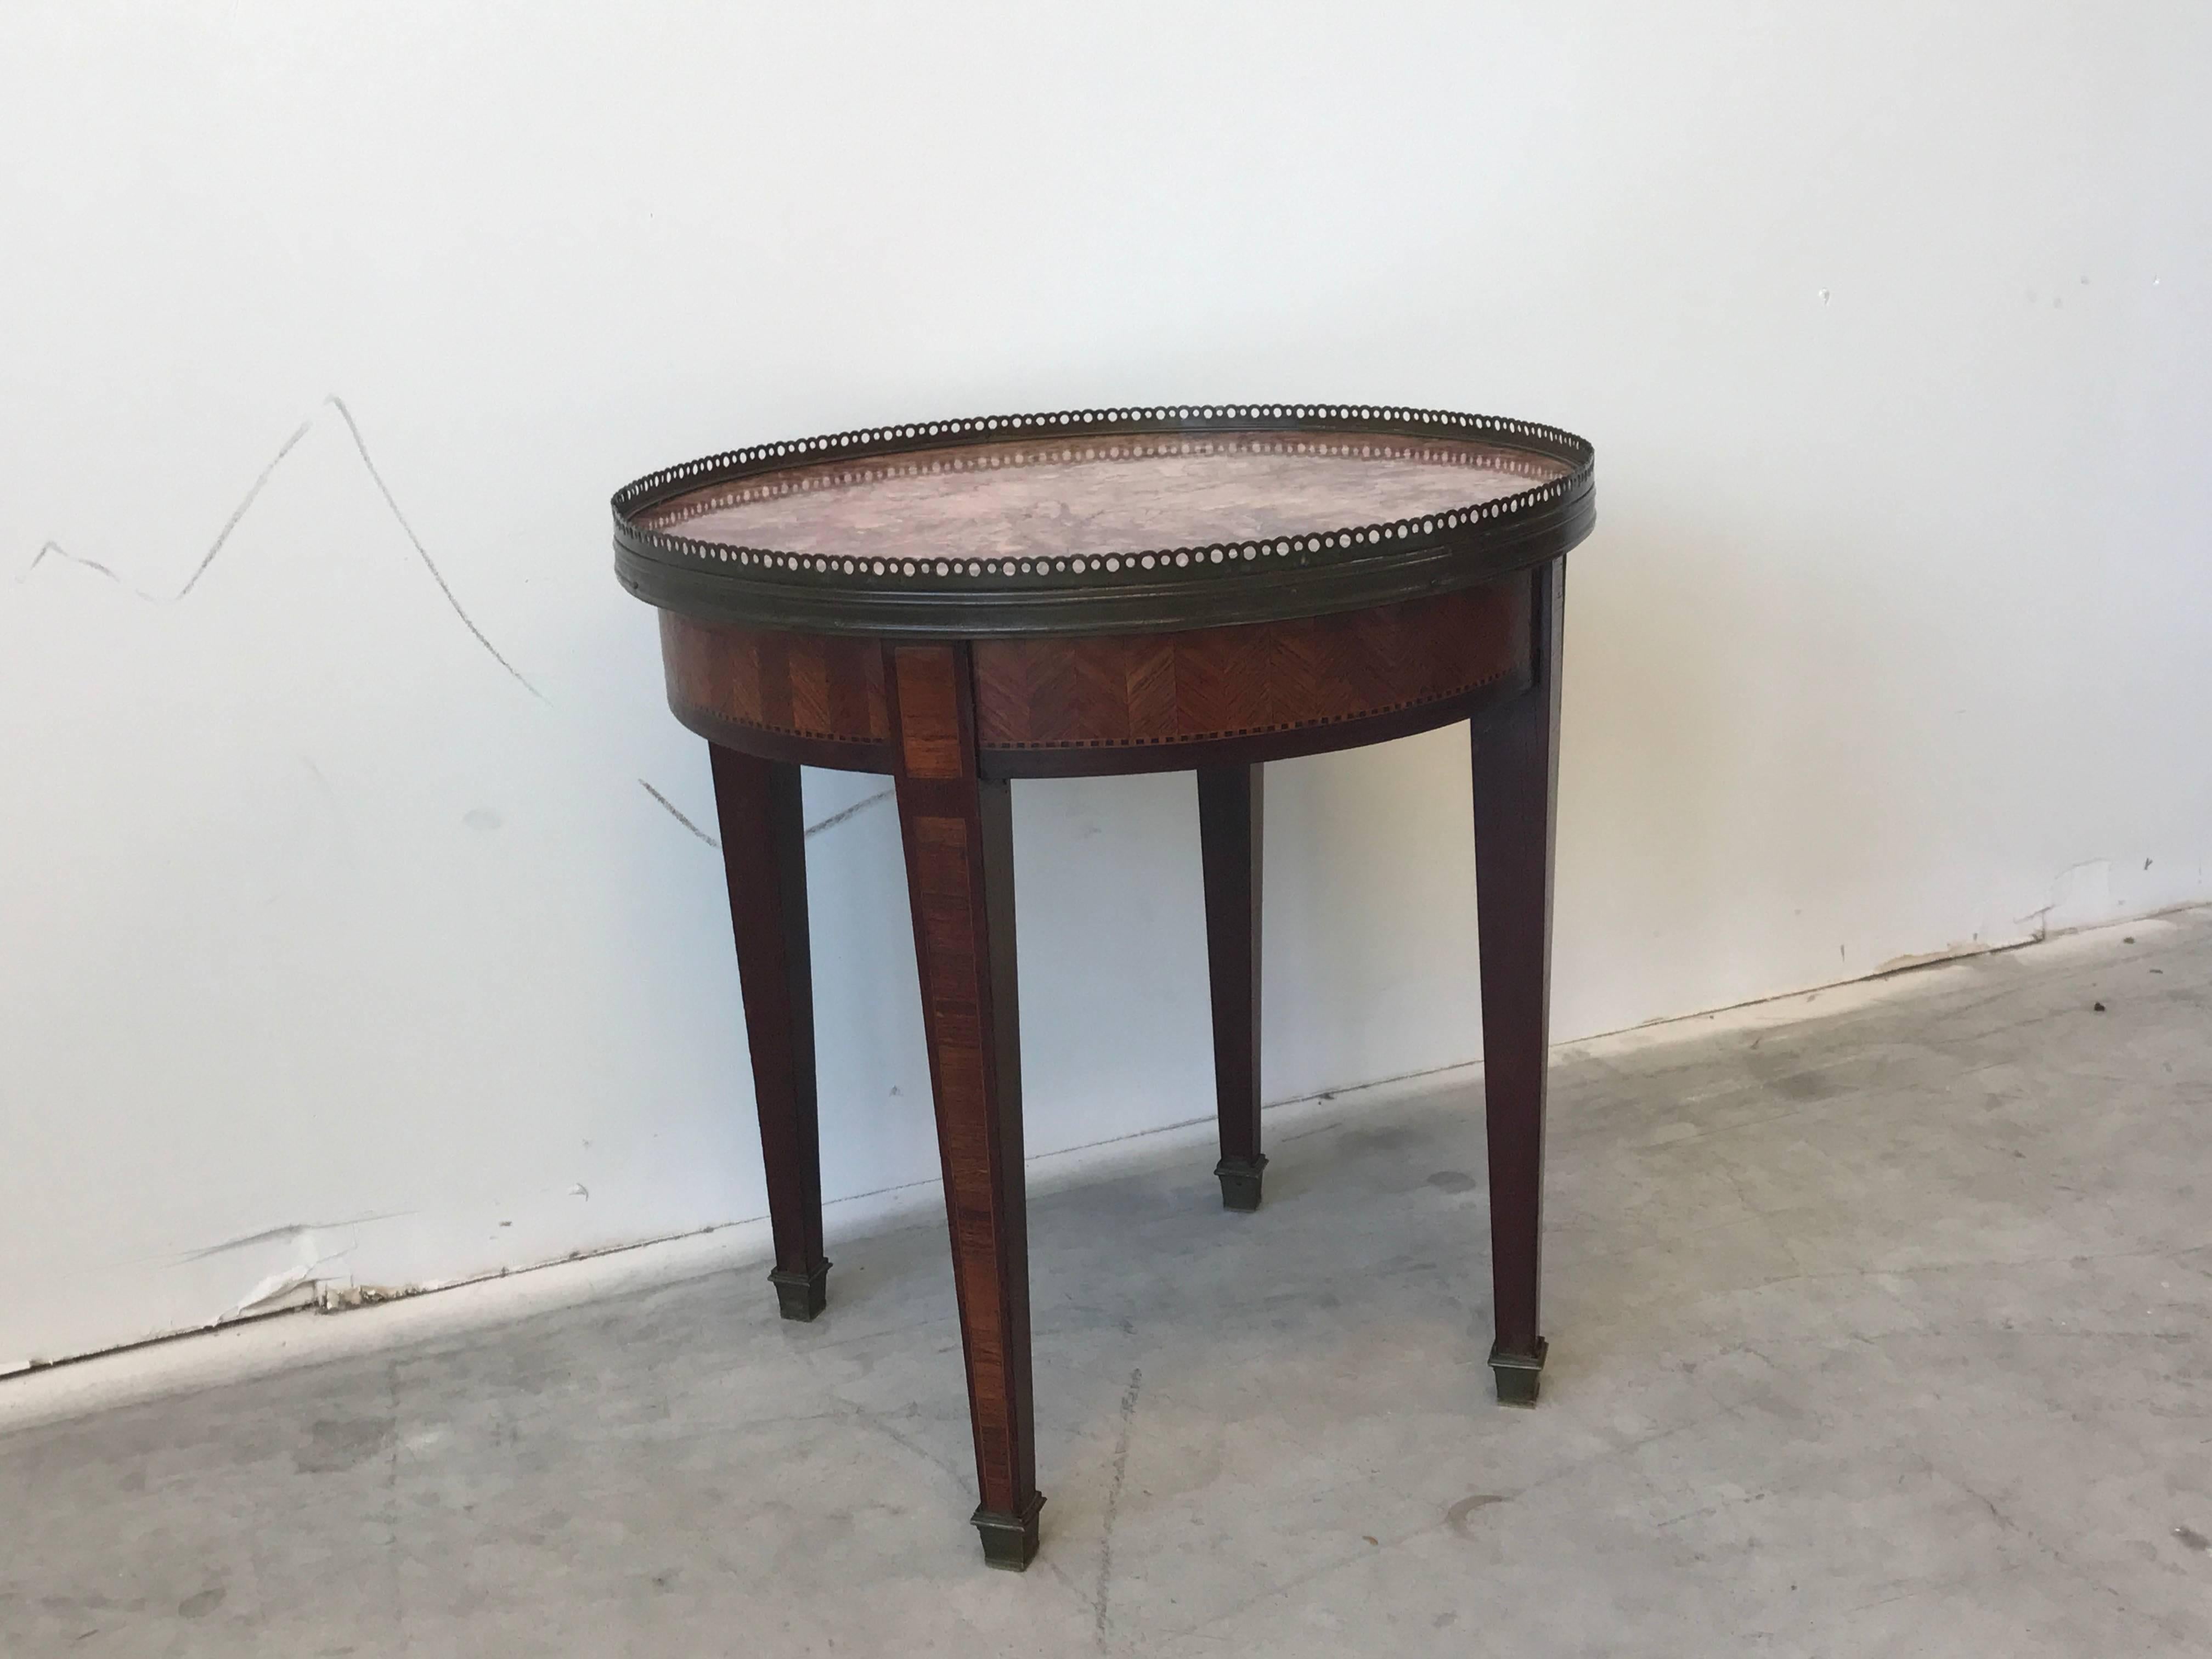 Offered is an immaculate, early 19th century, French marquetry guideron side table with a pink marble top. The piece is complimented by brass toe caps and brass gallery edging. Finished underside, weighs approx. 30ibs.